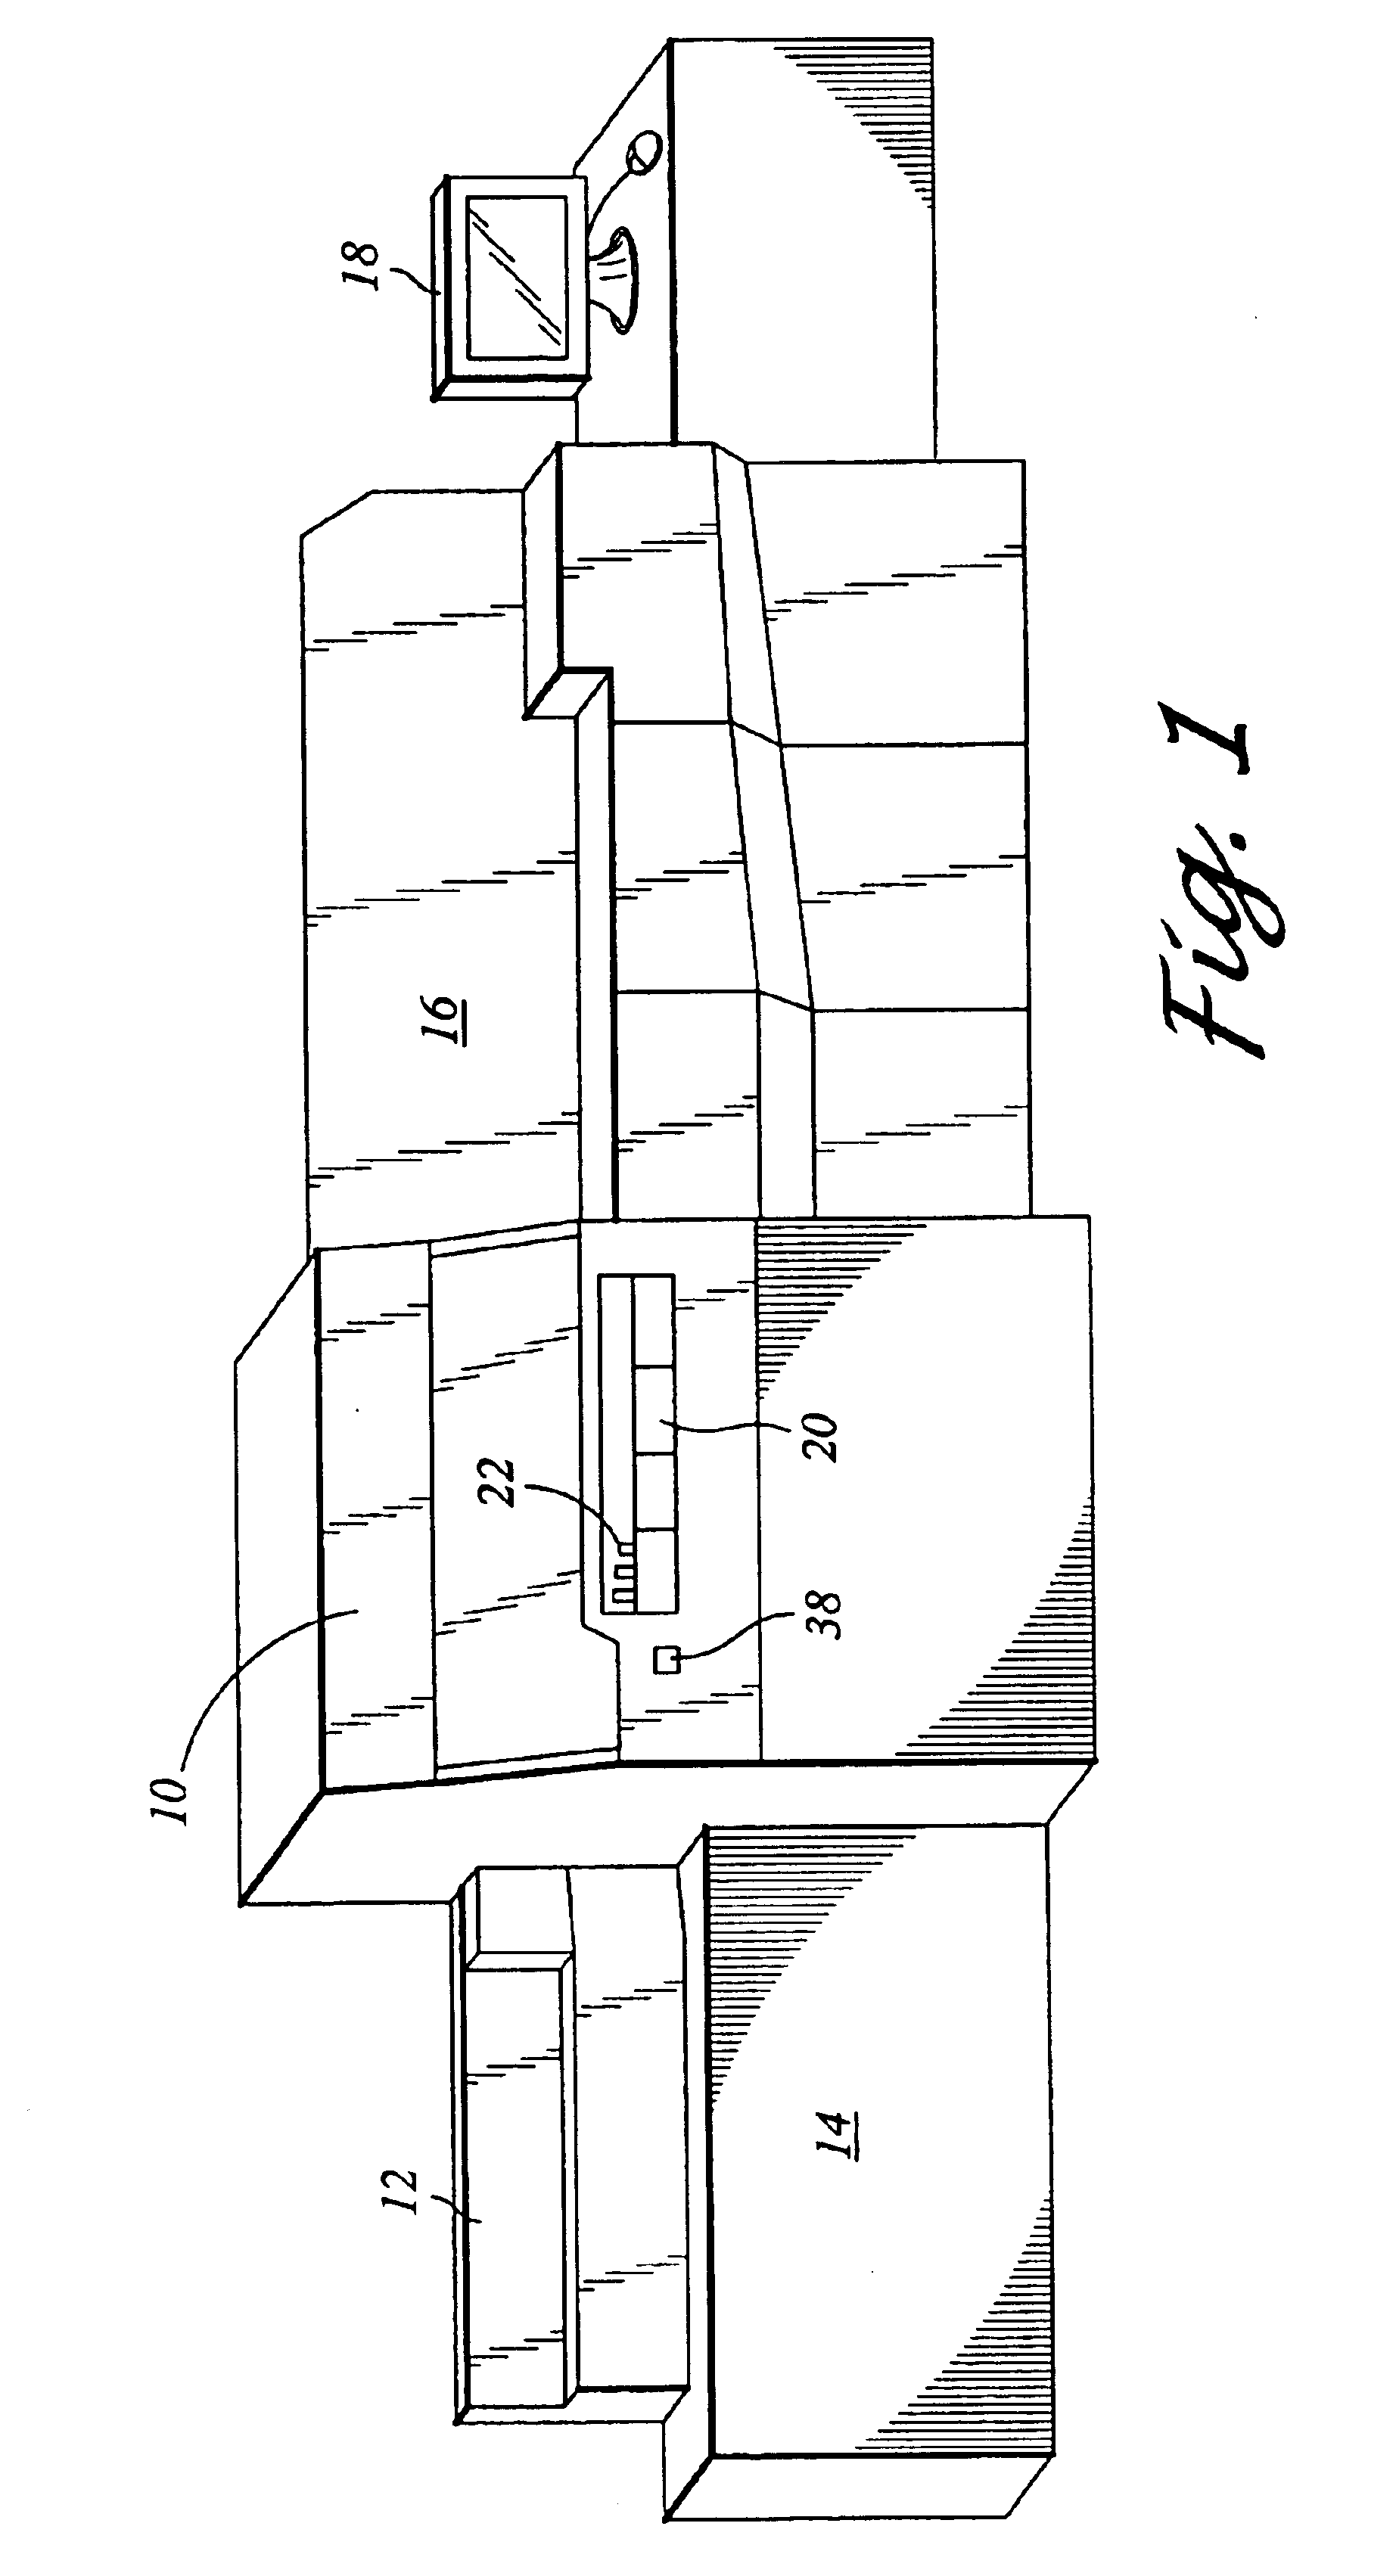 Sample loading and handling interface to multiple chemistry analyzers